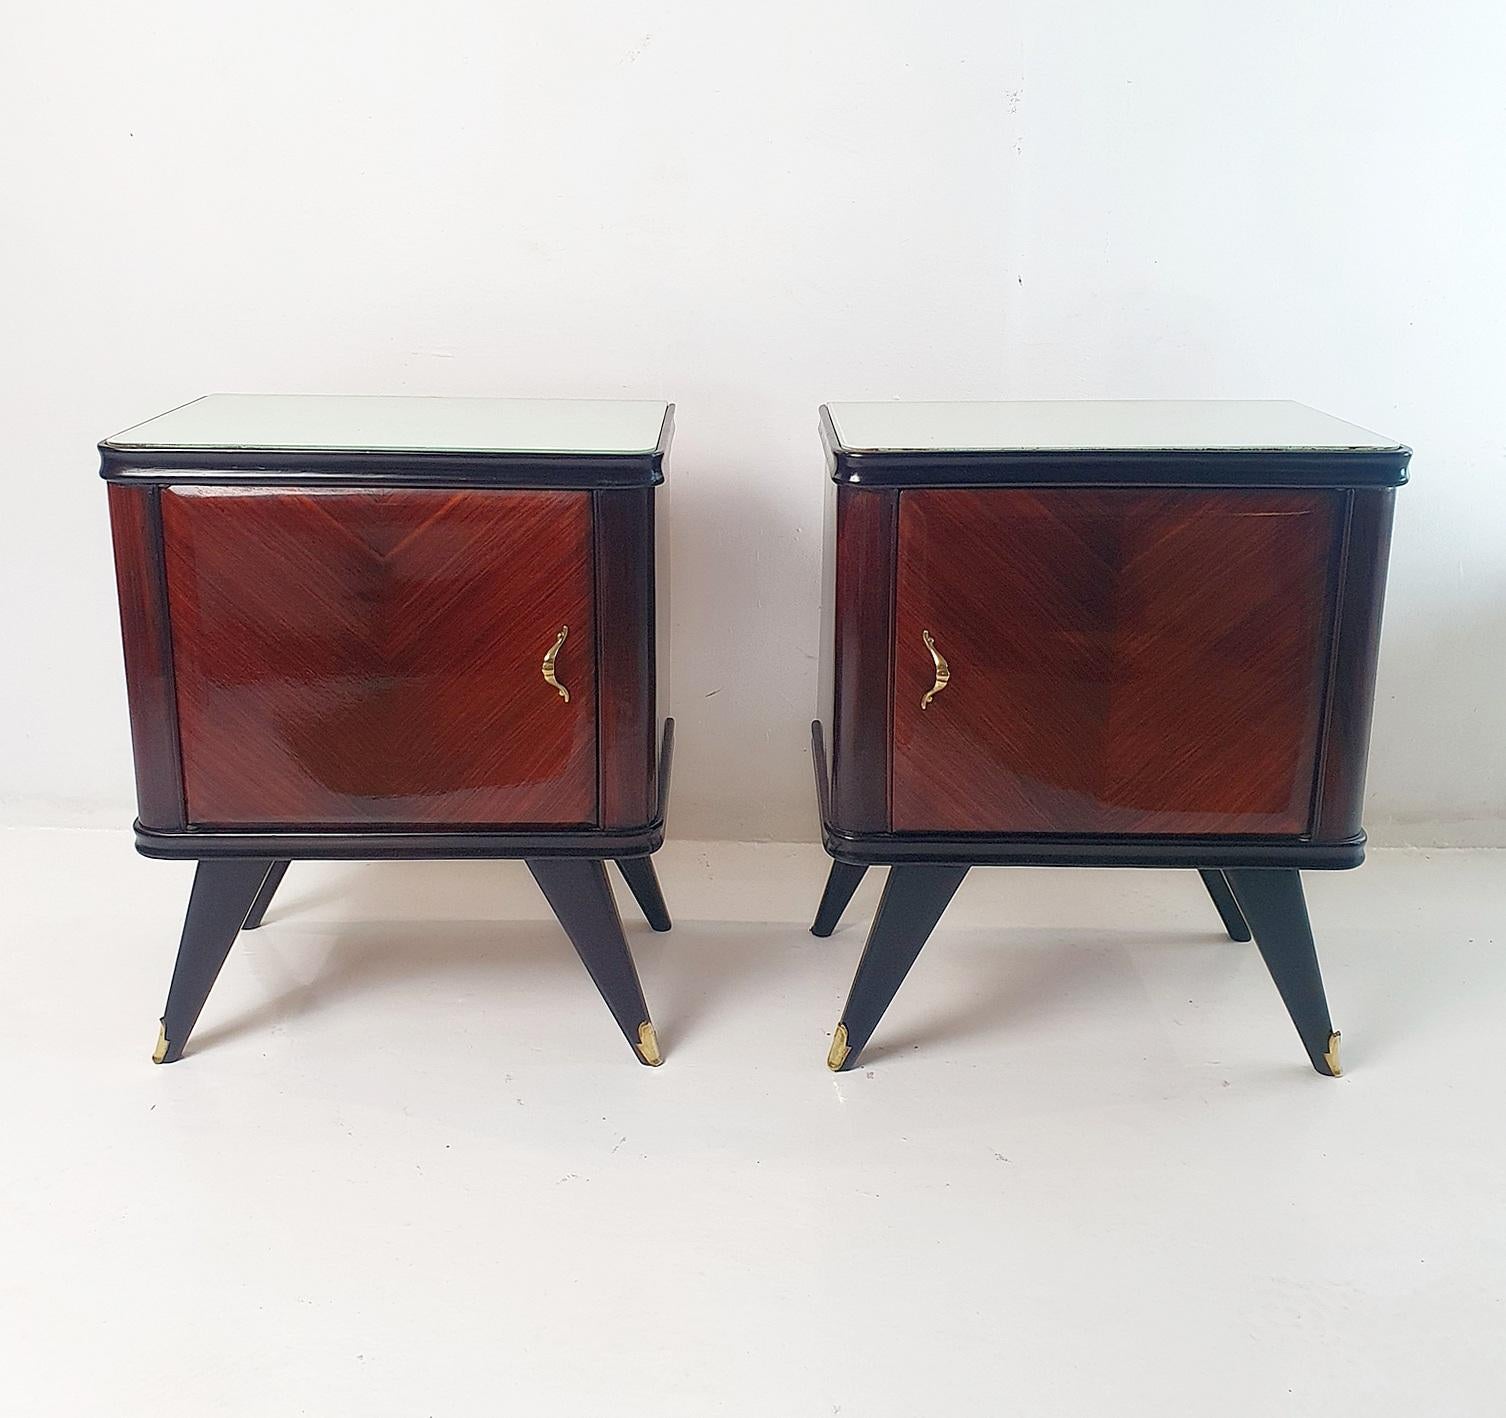 A pair of mid century modern nightstands handmade in Italy during the 1950's. The nightstands have been recently professionally restored with french polish giving the wood a beautiful shine reflecting the grain in the wood. Topped with a single